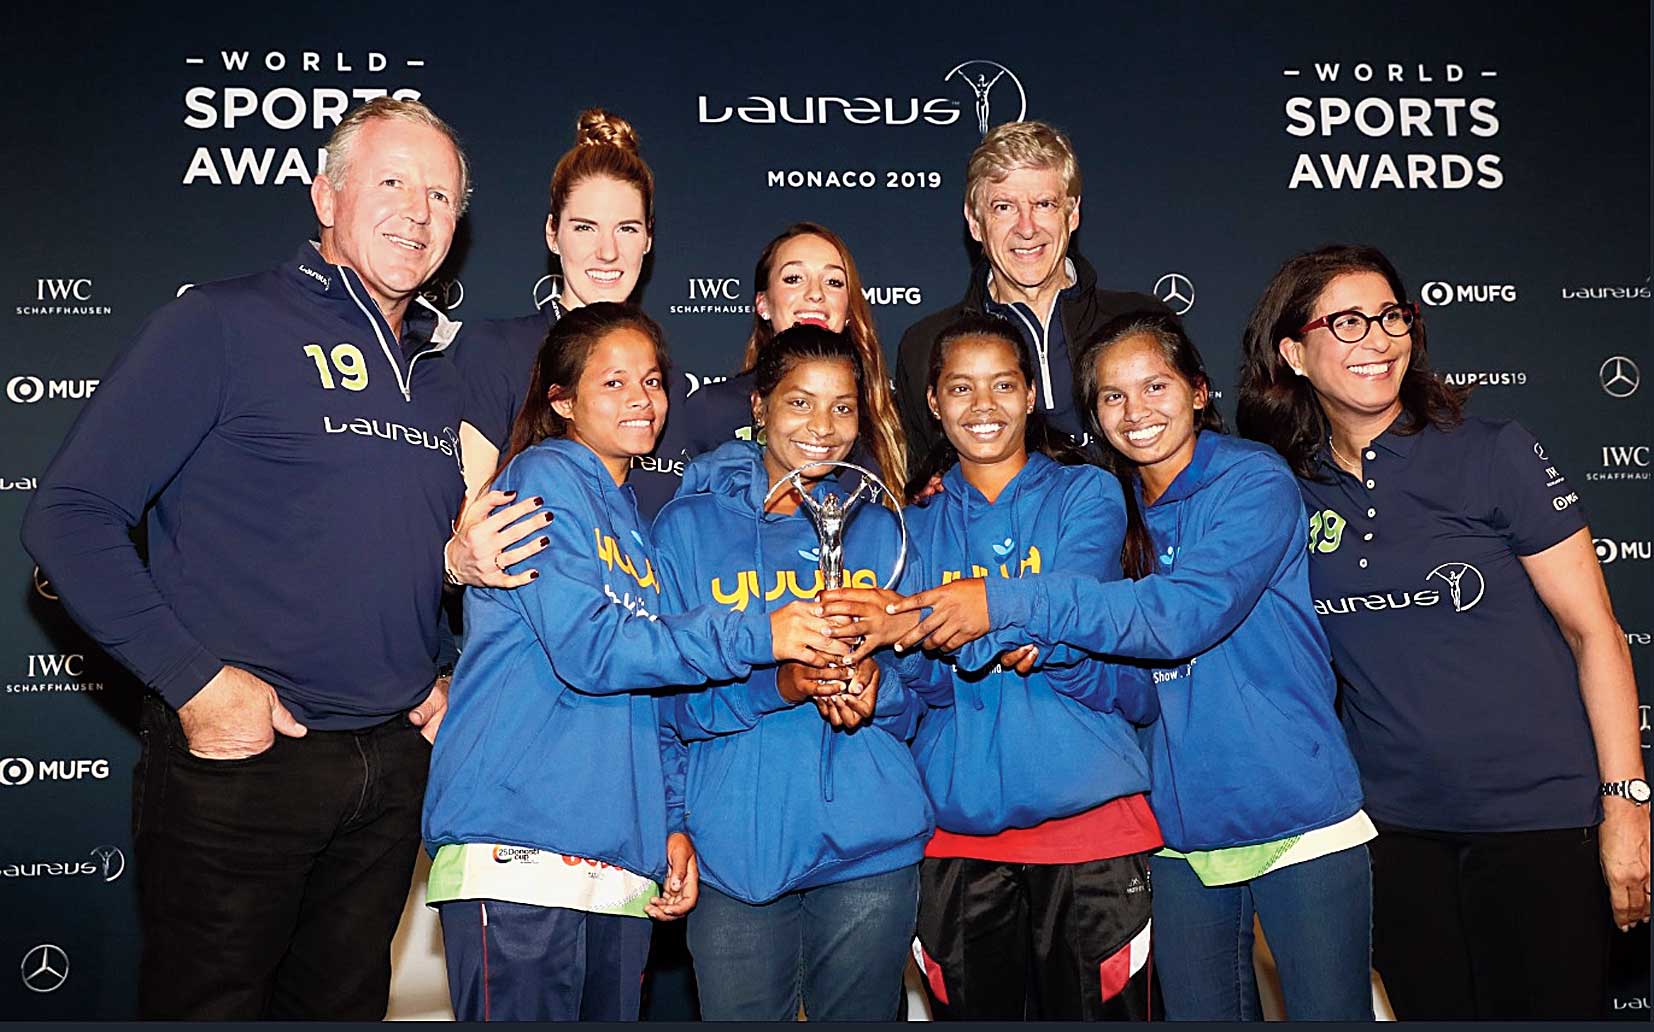 The Yuwa girls with former Arsenal manager Arsene Wenger and  Olympic swimming champ Missy Franklin at the awards ceremony in Monaco on Sunday.